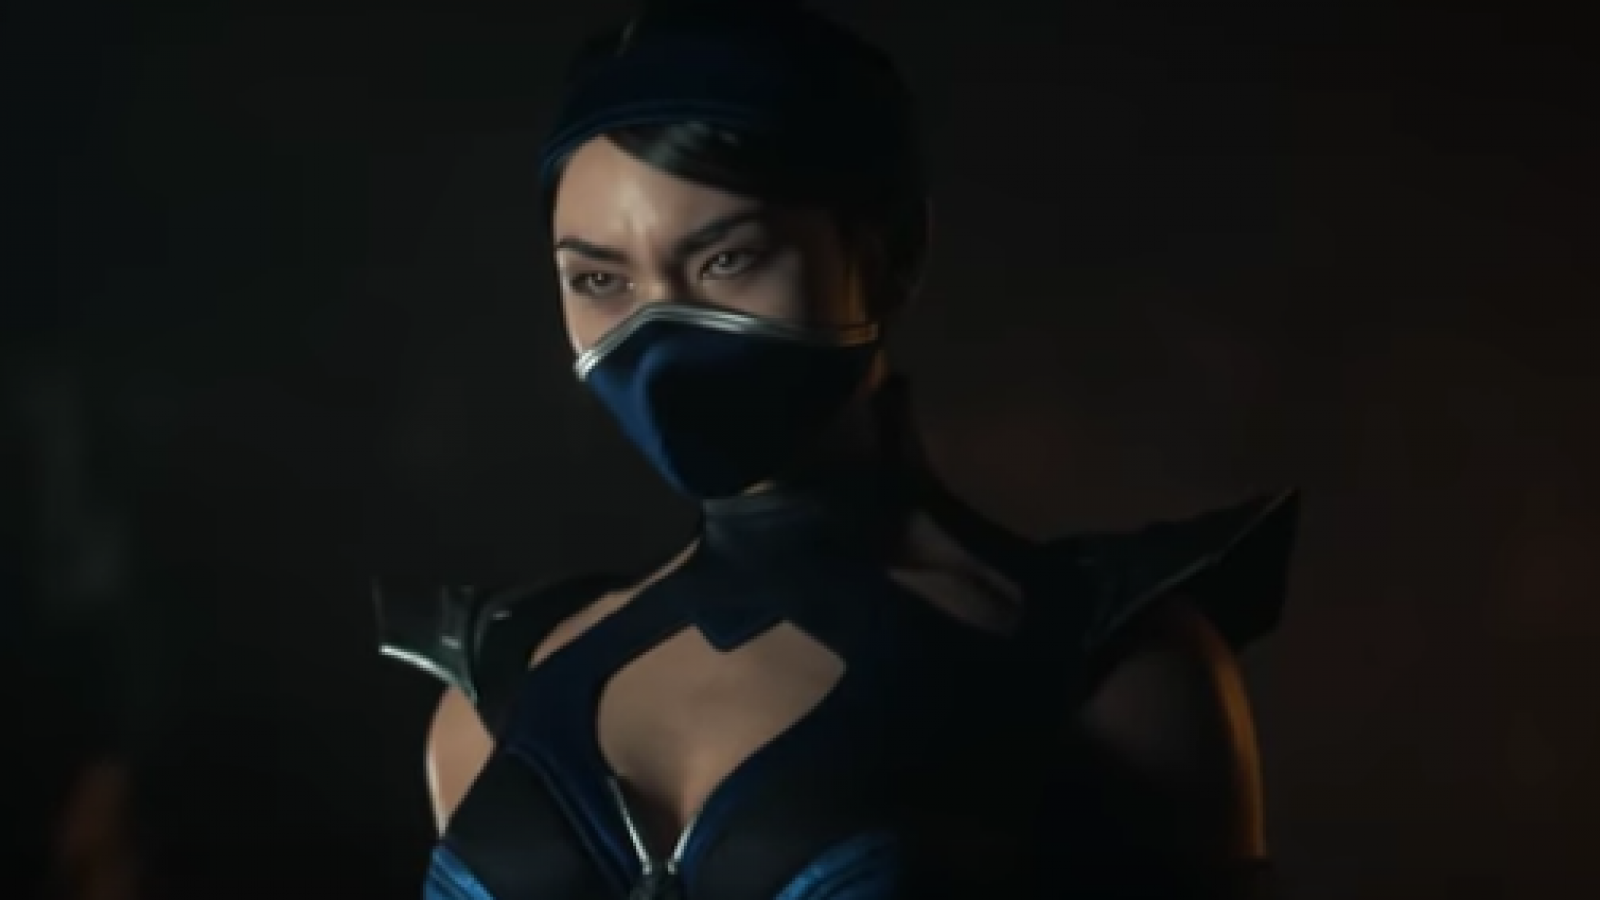 Mortal Kombat 11' Version 1.17 Update Adds More Practice Mode Options and Character Changes